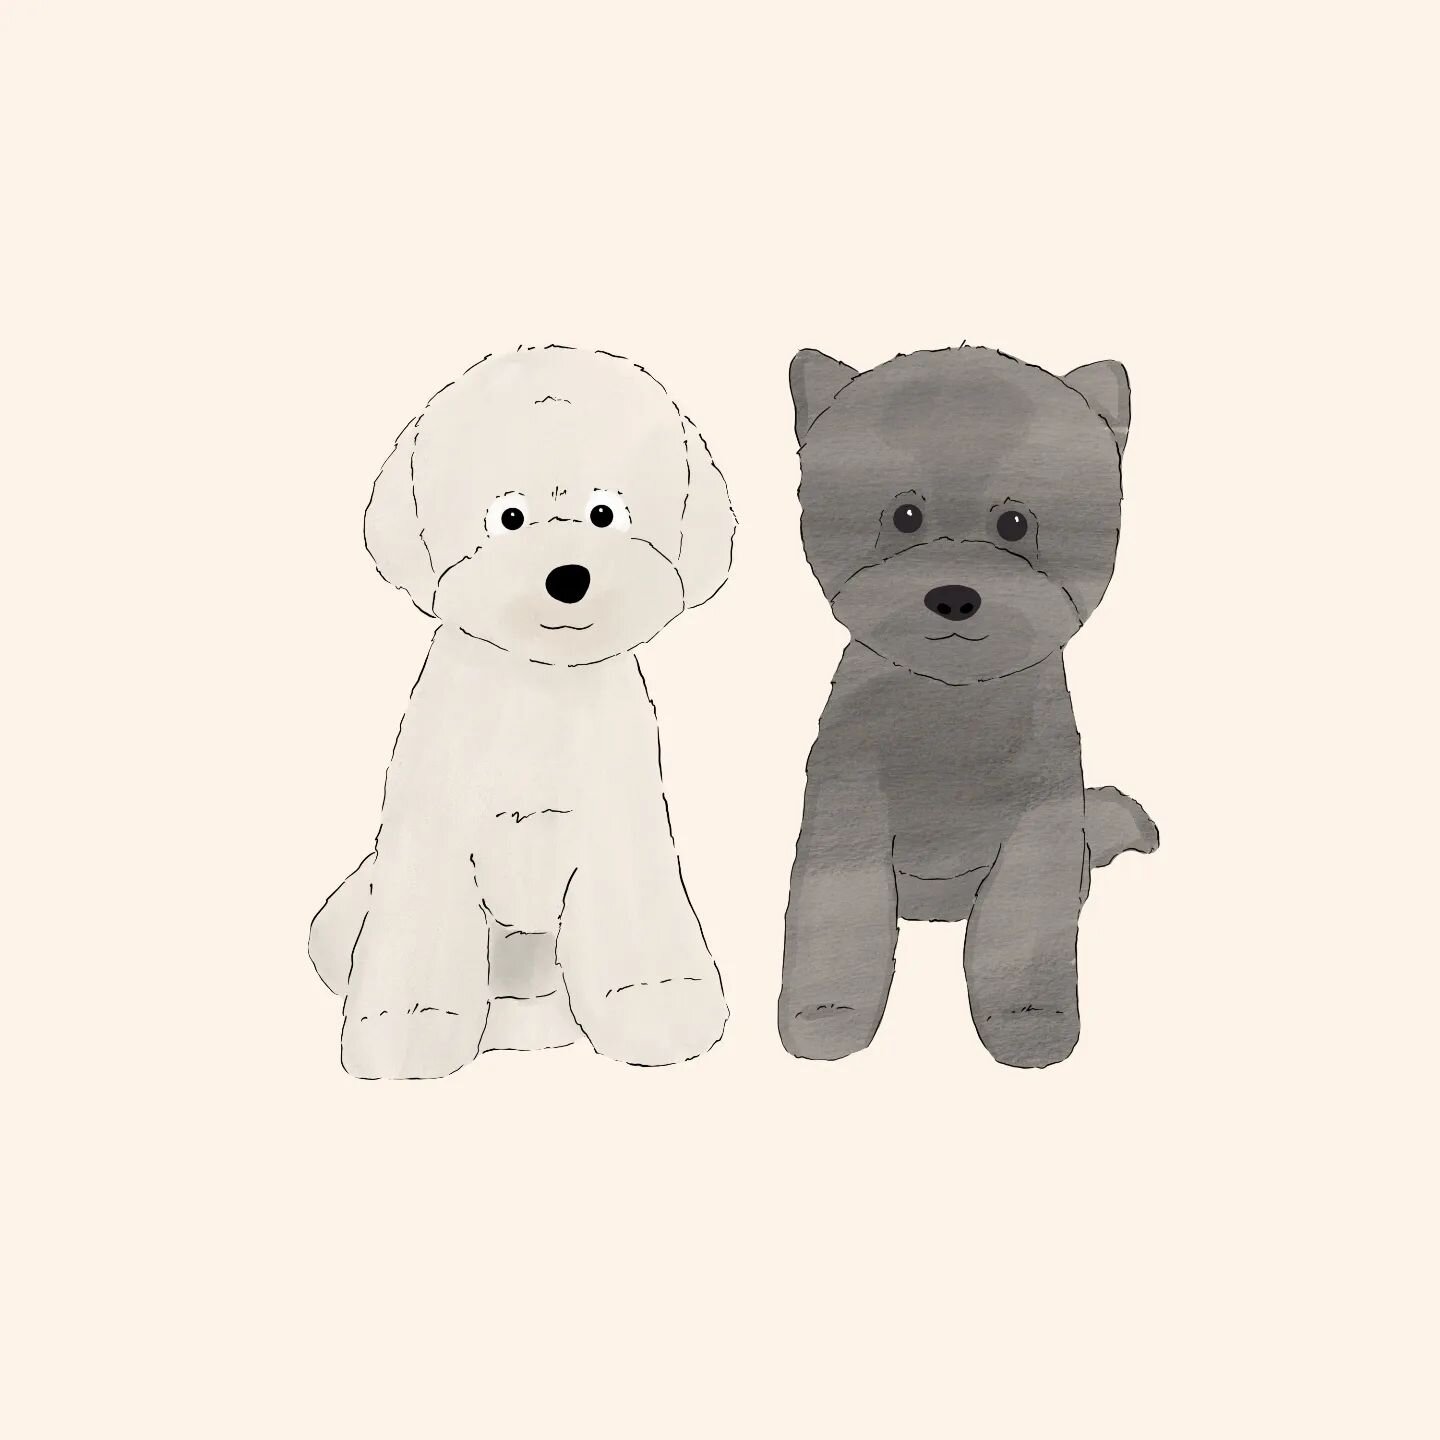 When your fur babies make it to the invitation.
These cute poodles really were on the invitation for L&amp;S.

Want a chance to have your lovely pets drawn for free? Join the Giveaway pinned on my profile.

#digitalillustrations #fashionillustration 